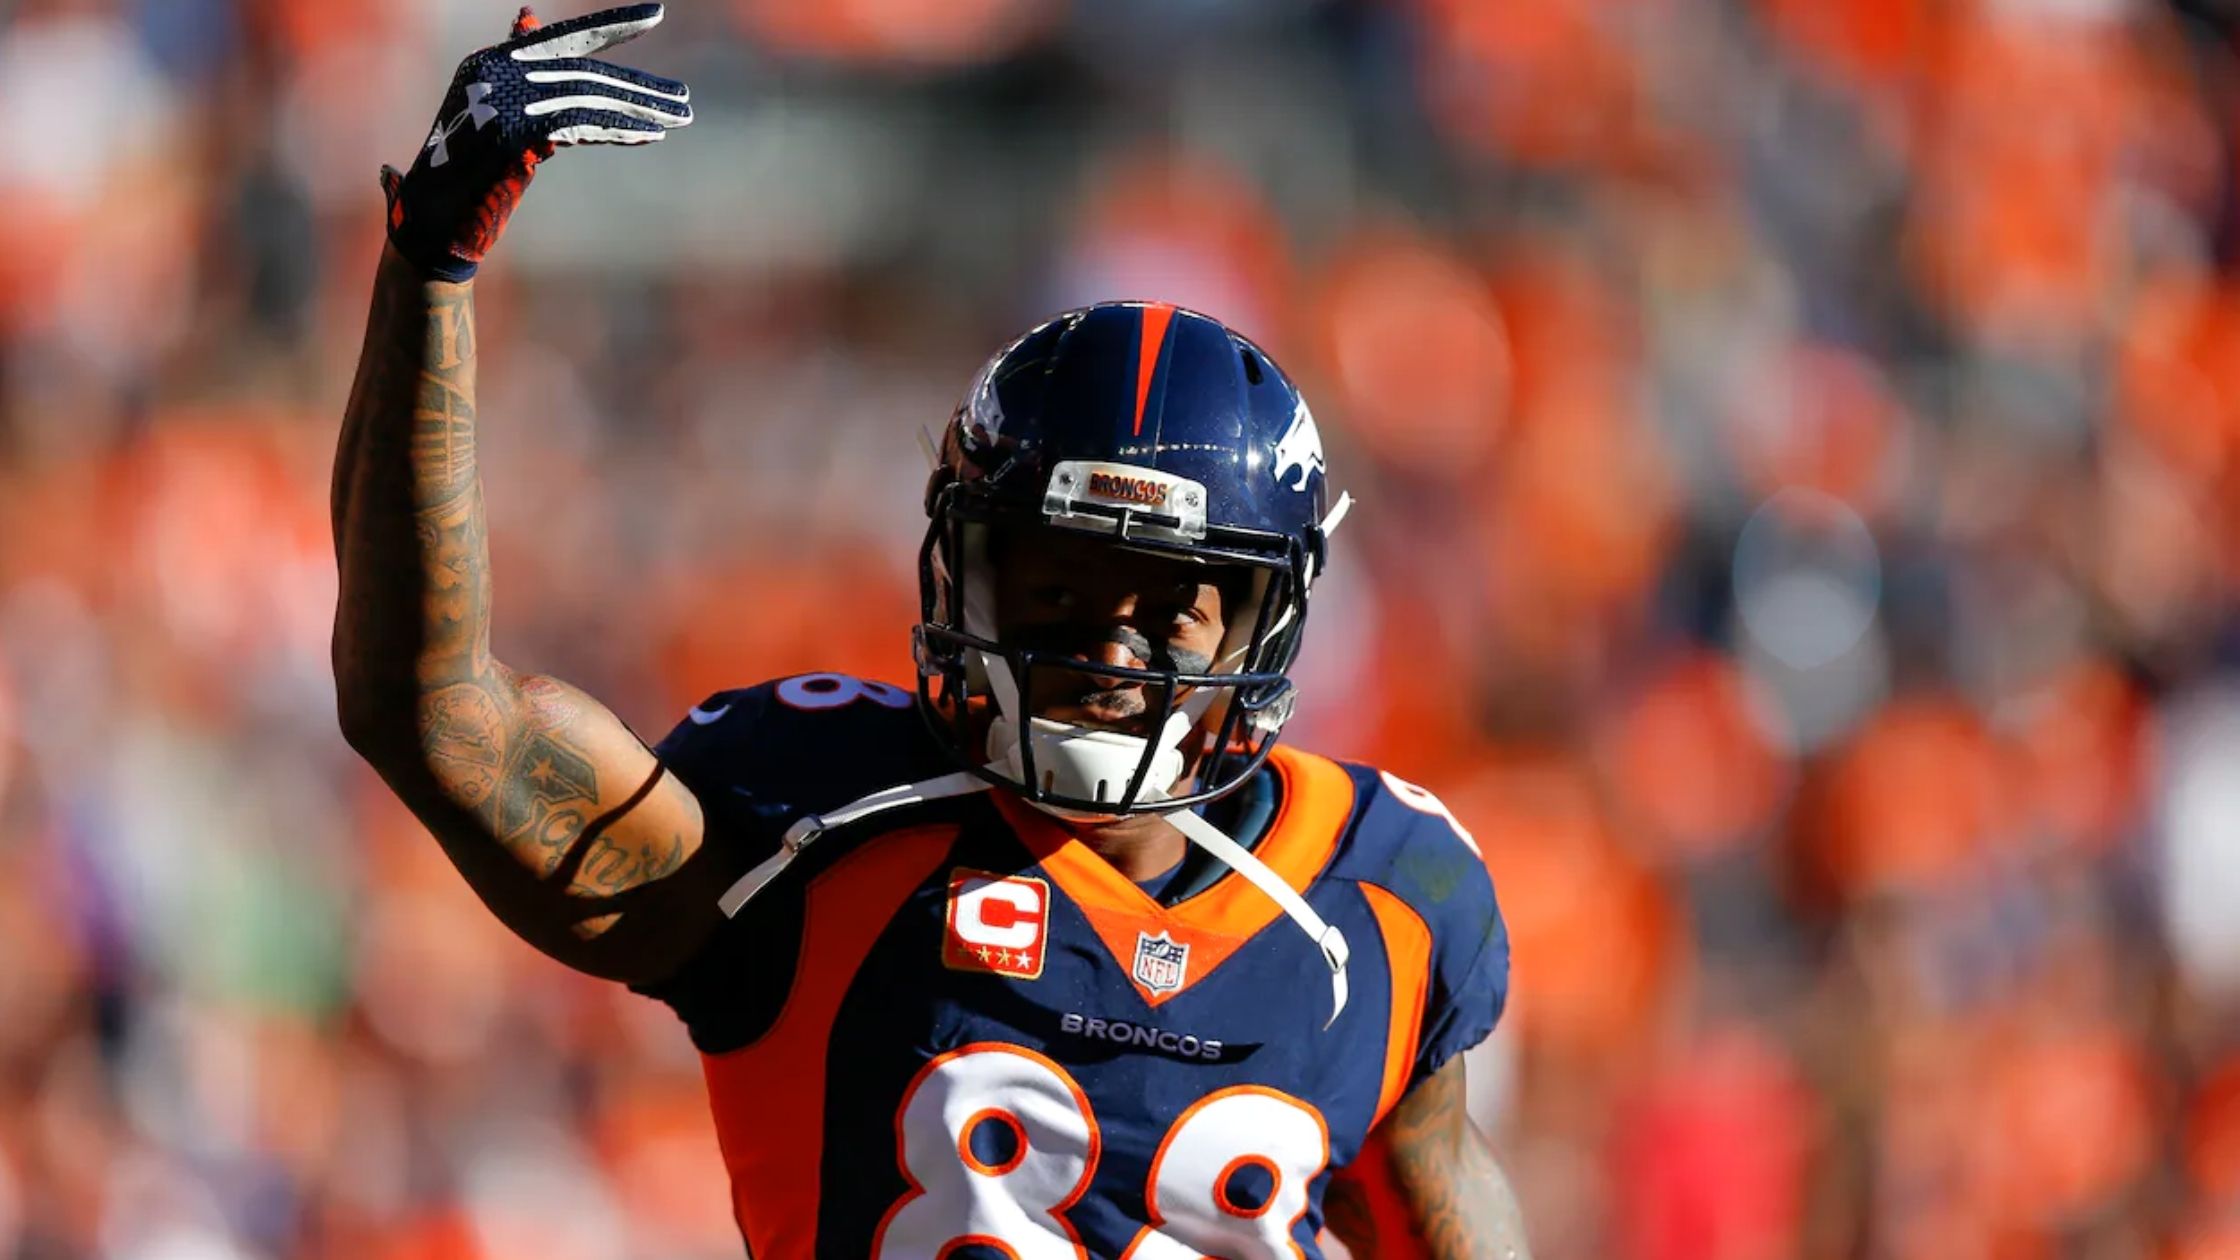 NFL Star Demaryius Thomas's Cause Of Death Revealed